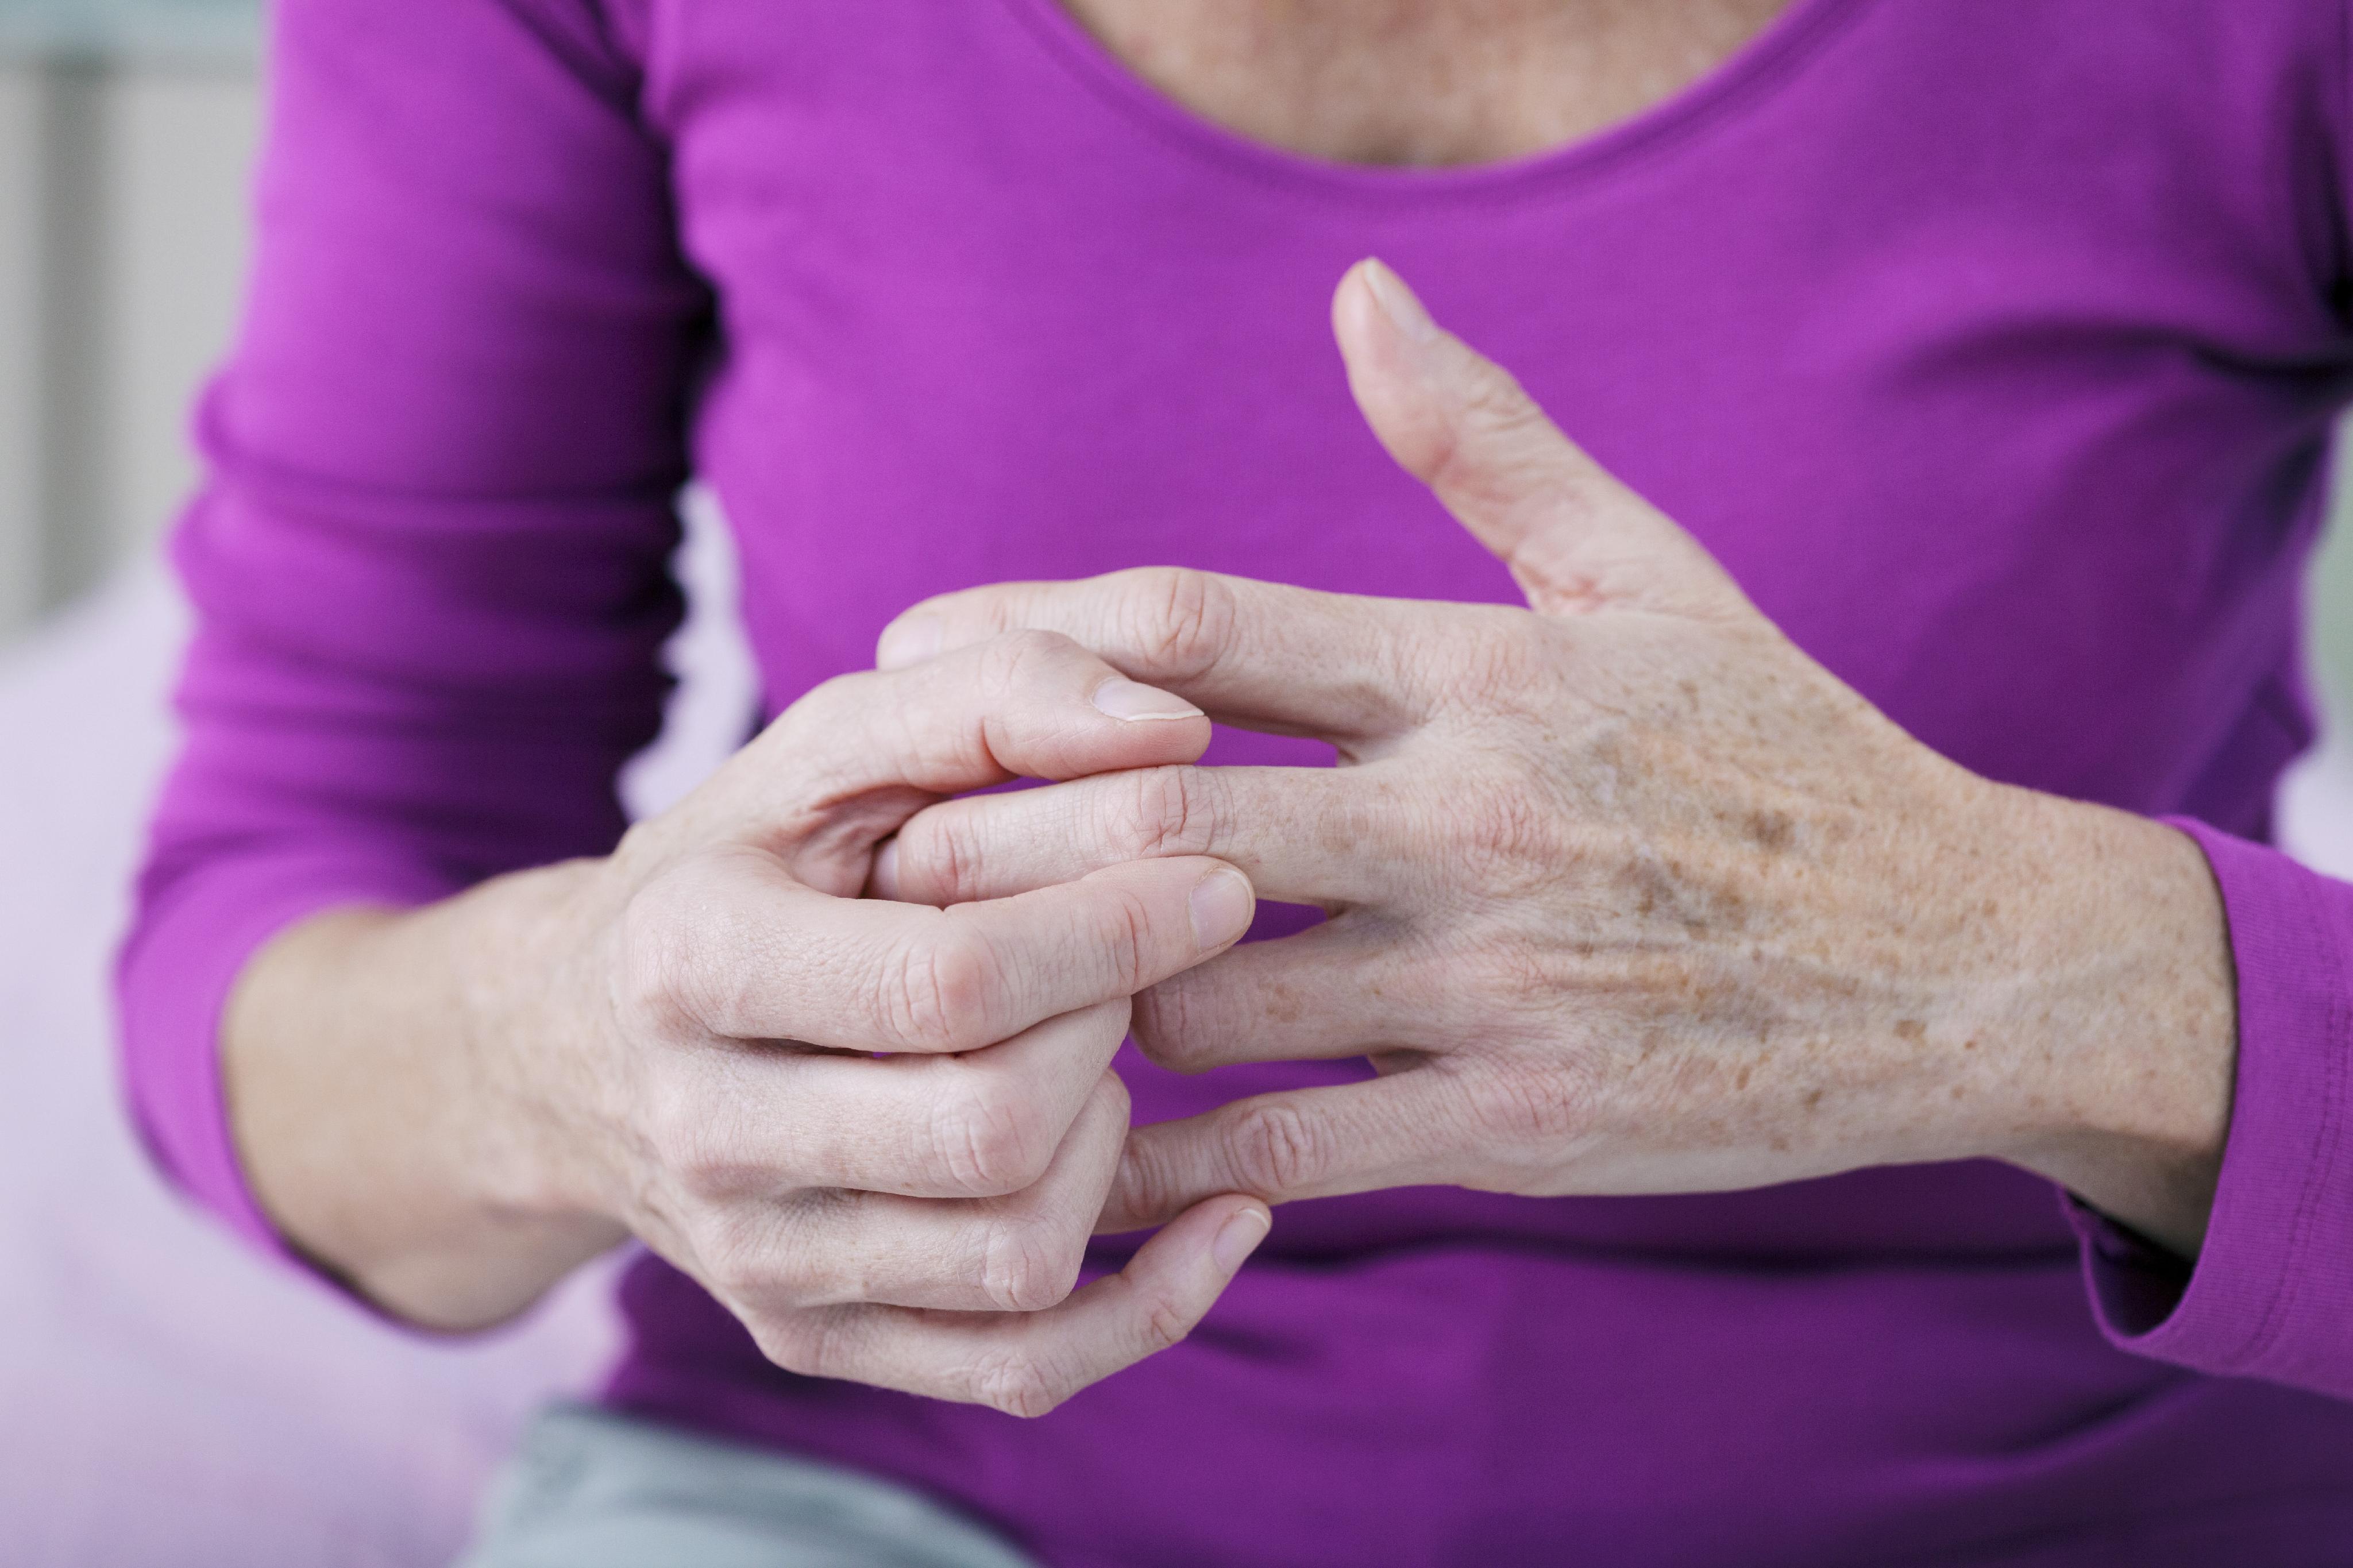 What are the Symptoms of Arthritis and the Treatment for Arthritis?